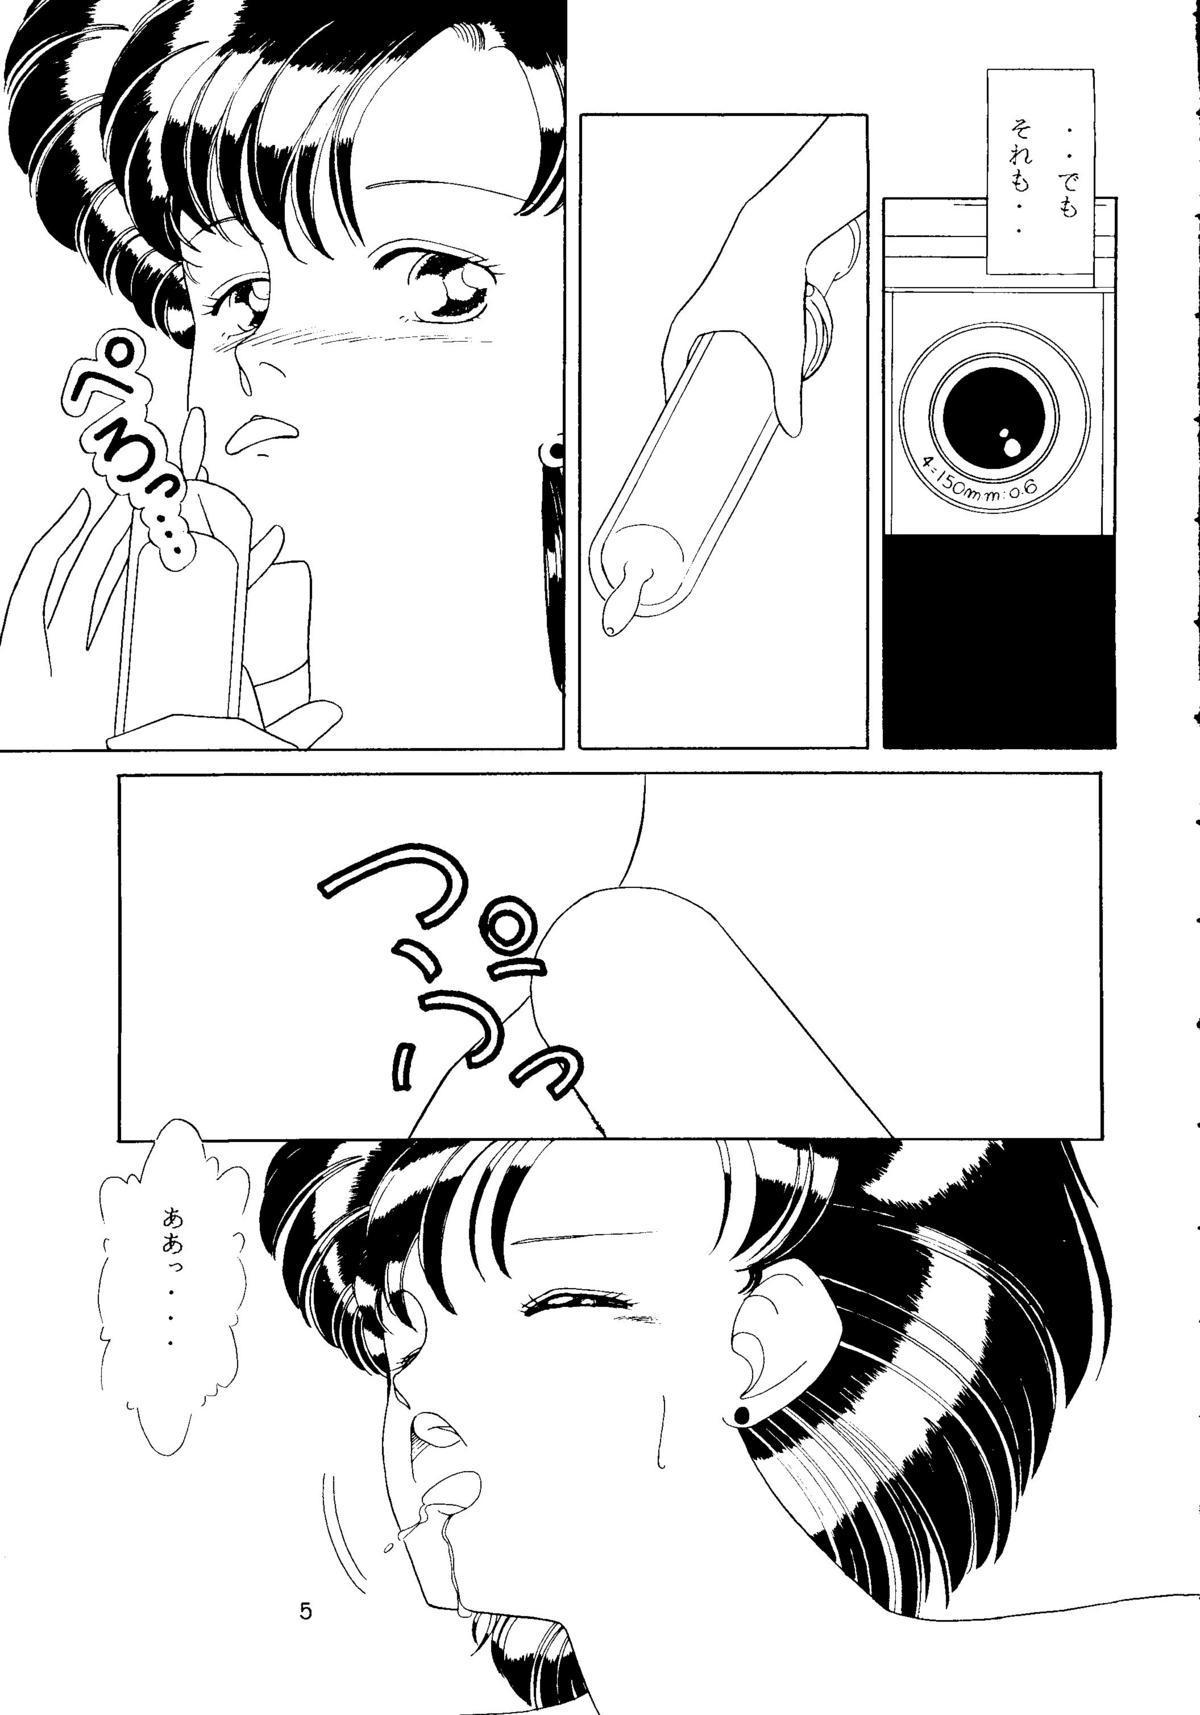 Mouth Moon Girl - Sailor moon Muscle - Page 6